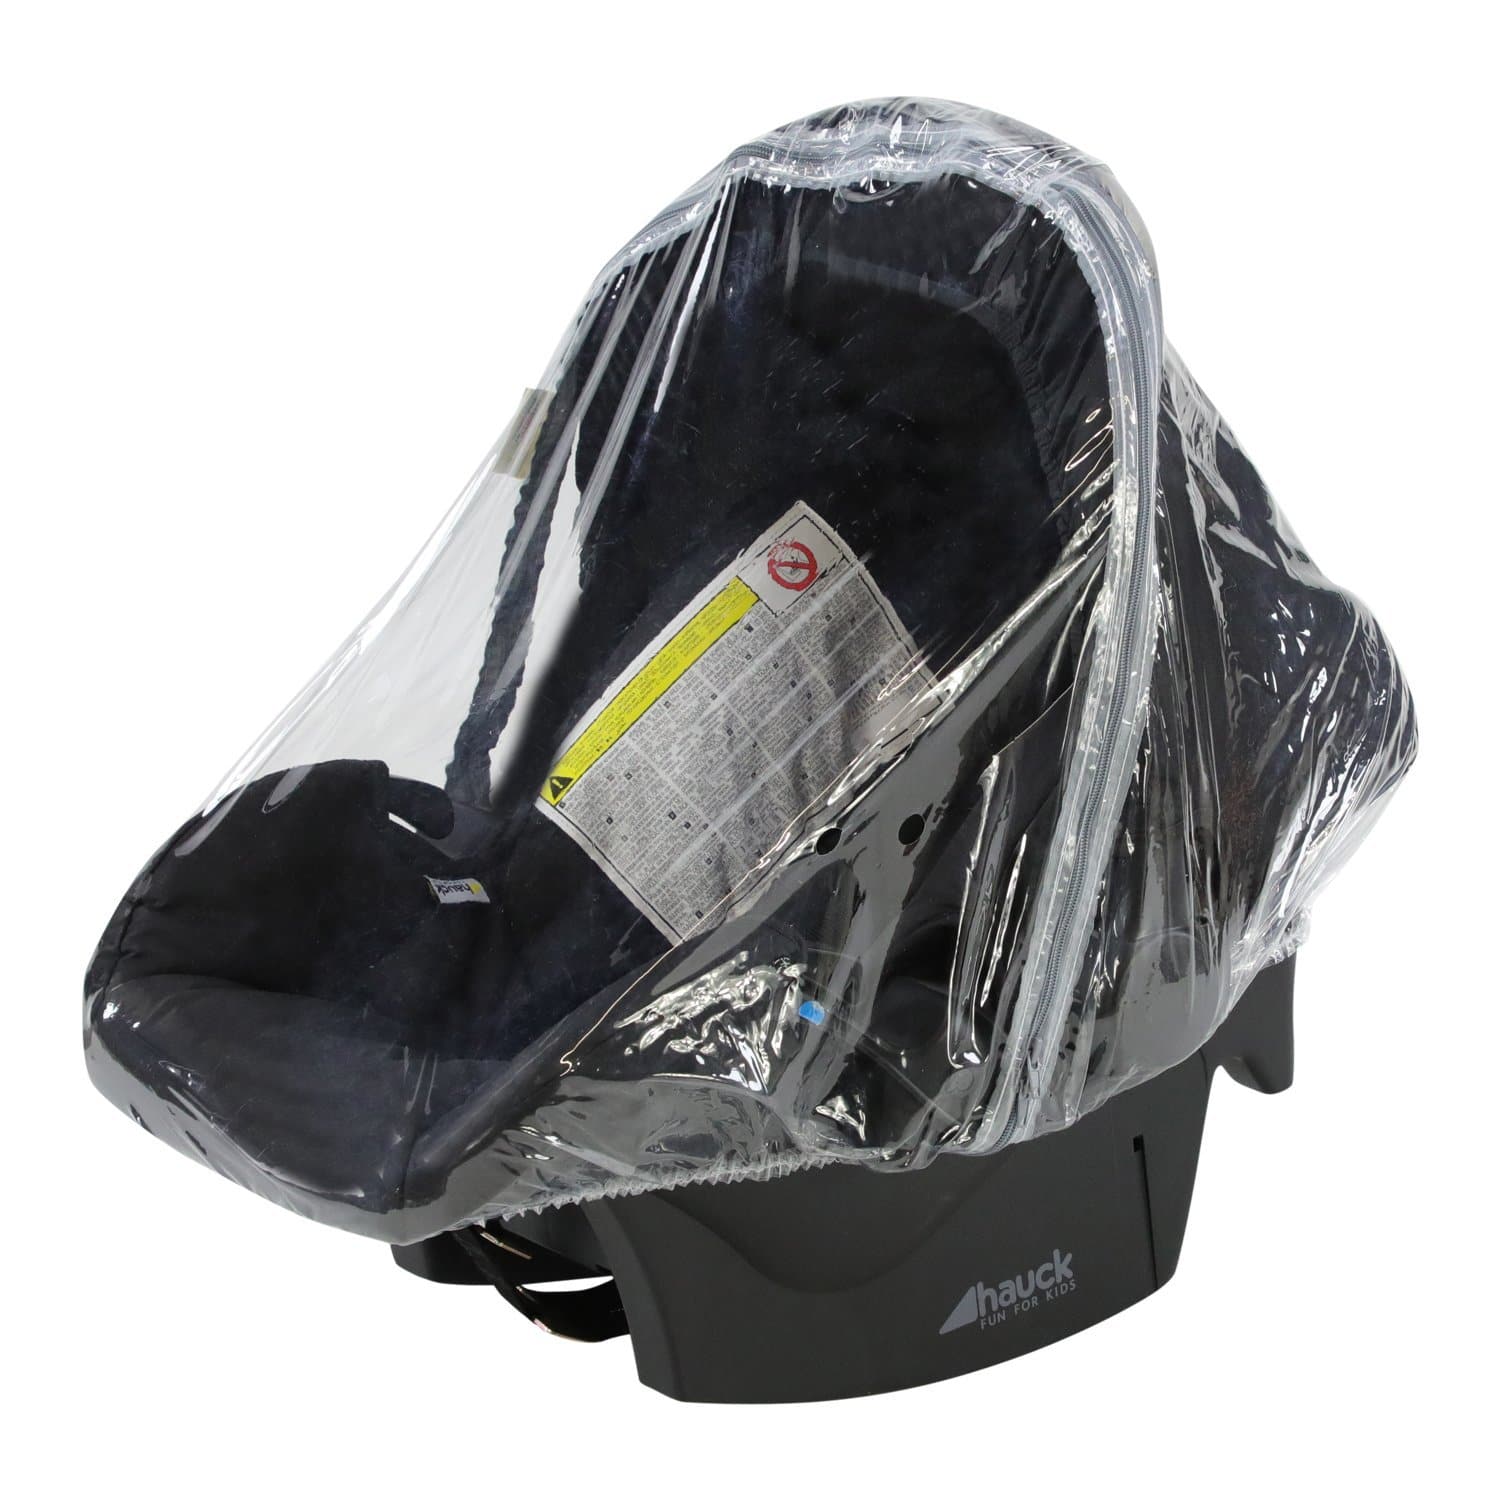 Car Seat Raincover Compatible with Tutti Bambini - For Your Little One